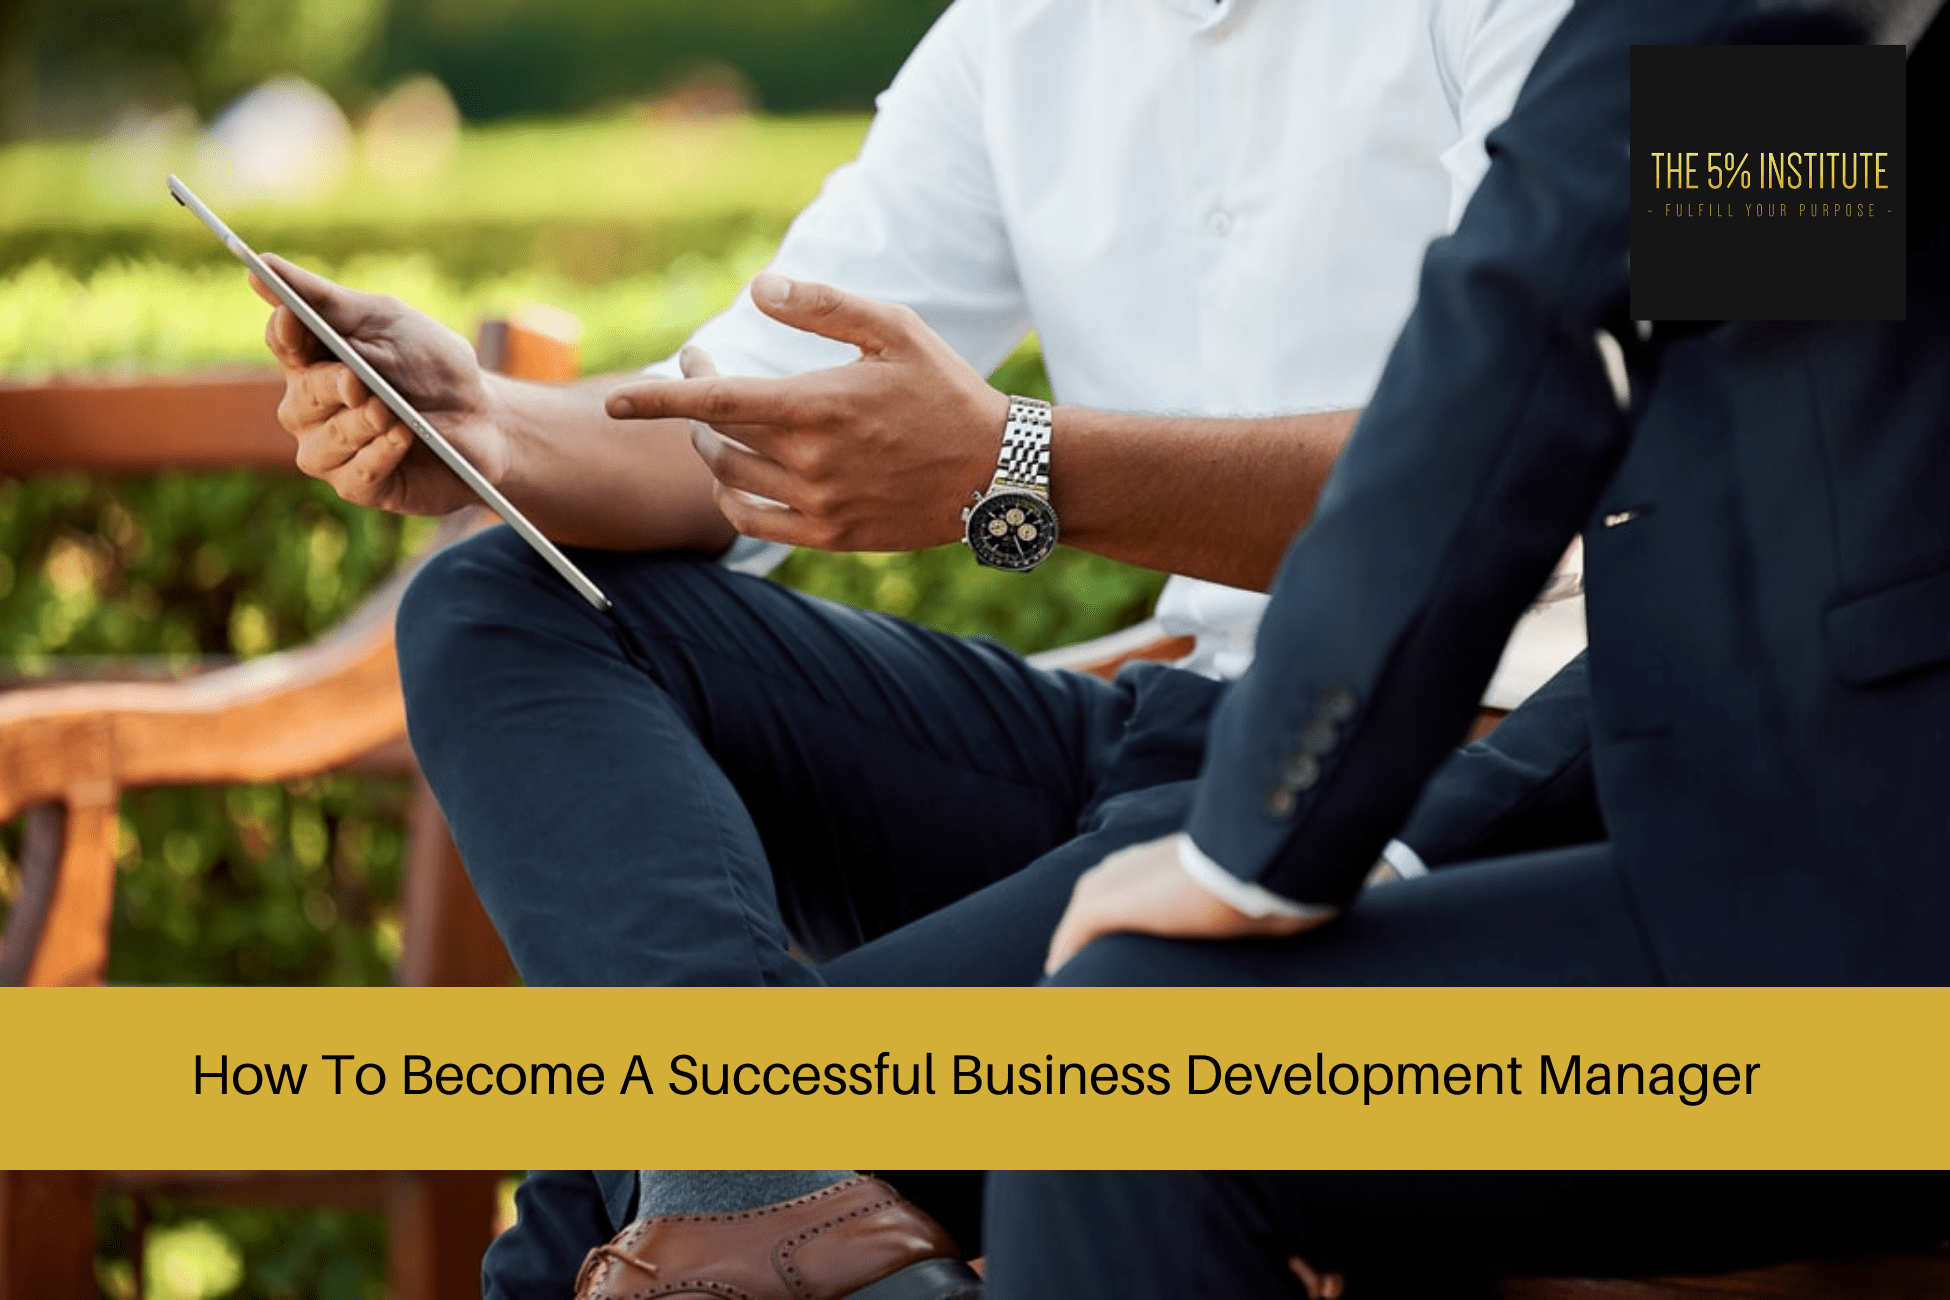 How To Become A Successful Business Development Manager